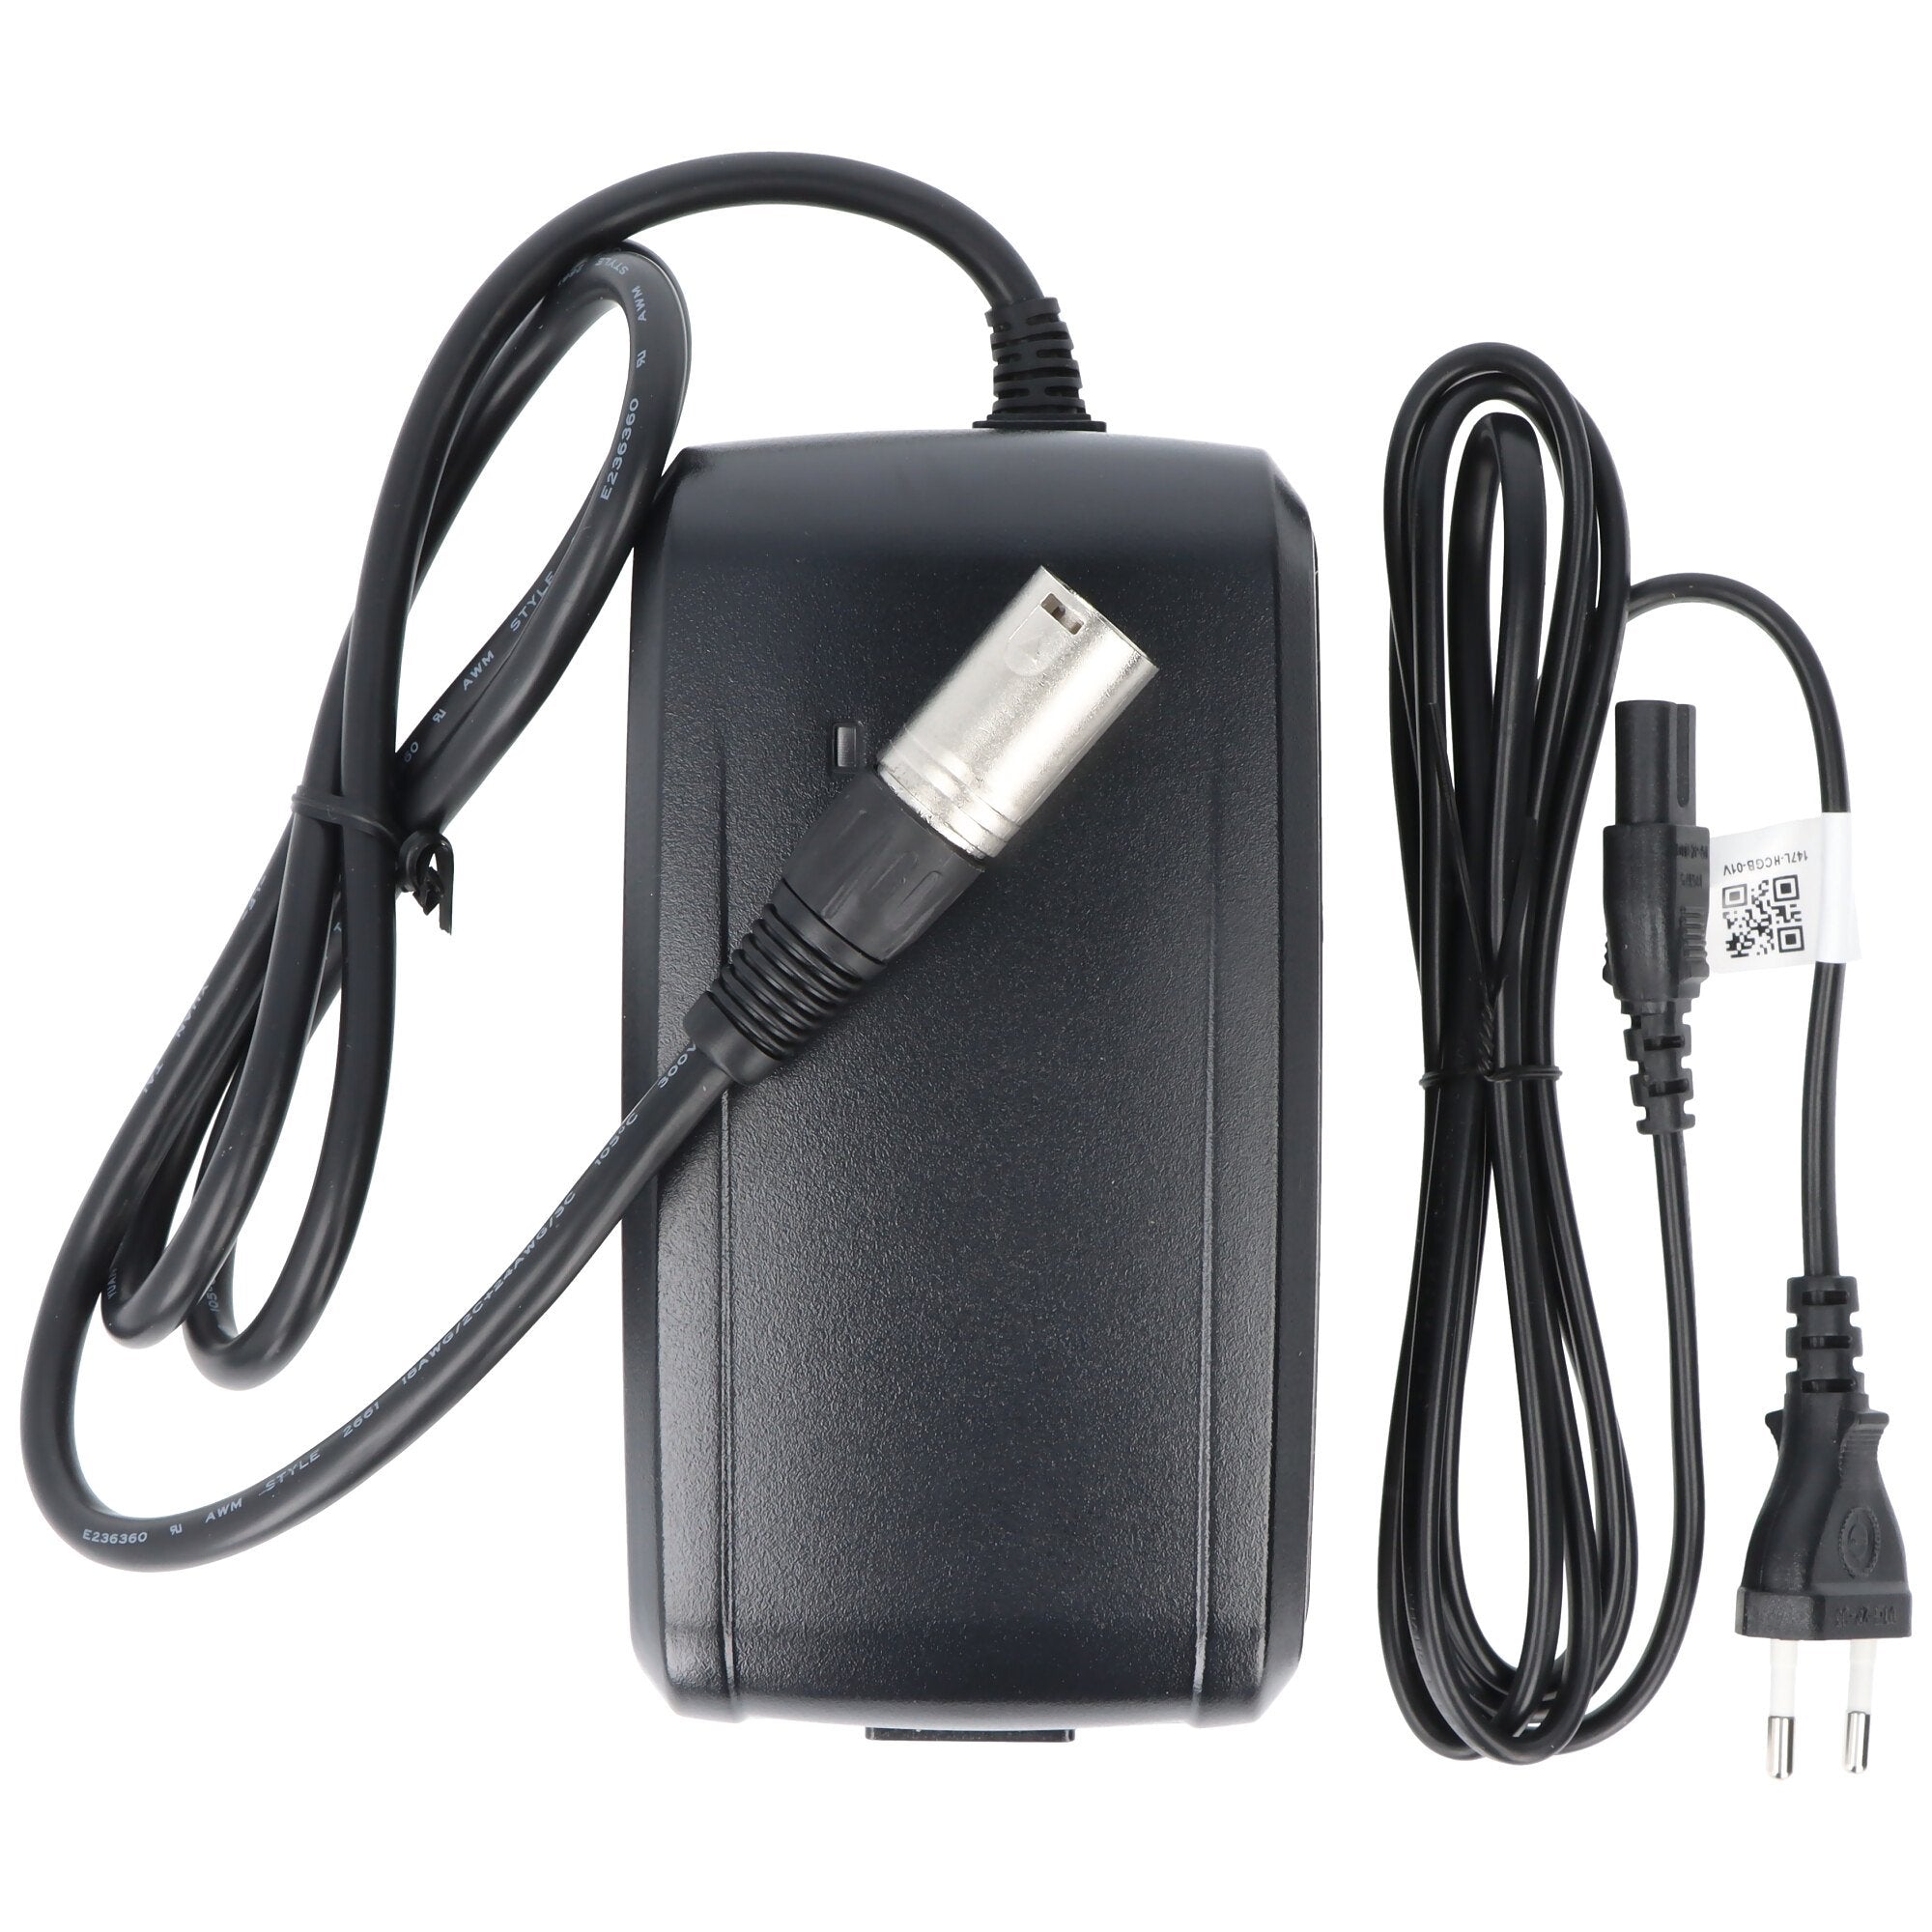 Giant EnergyPak battery quick charger 41.8V 5 pins, DPS-83CB A, GLI180A, NC-SSC05GNT